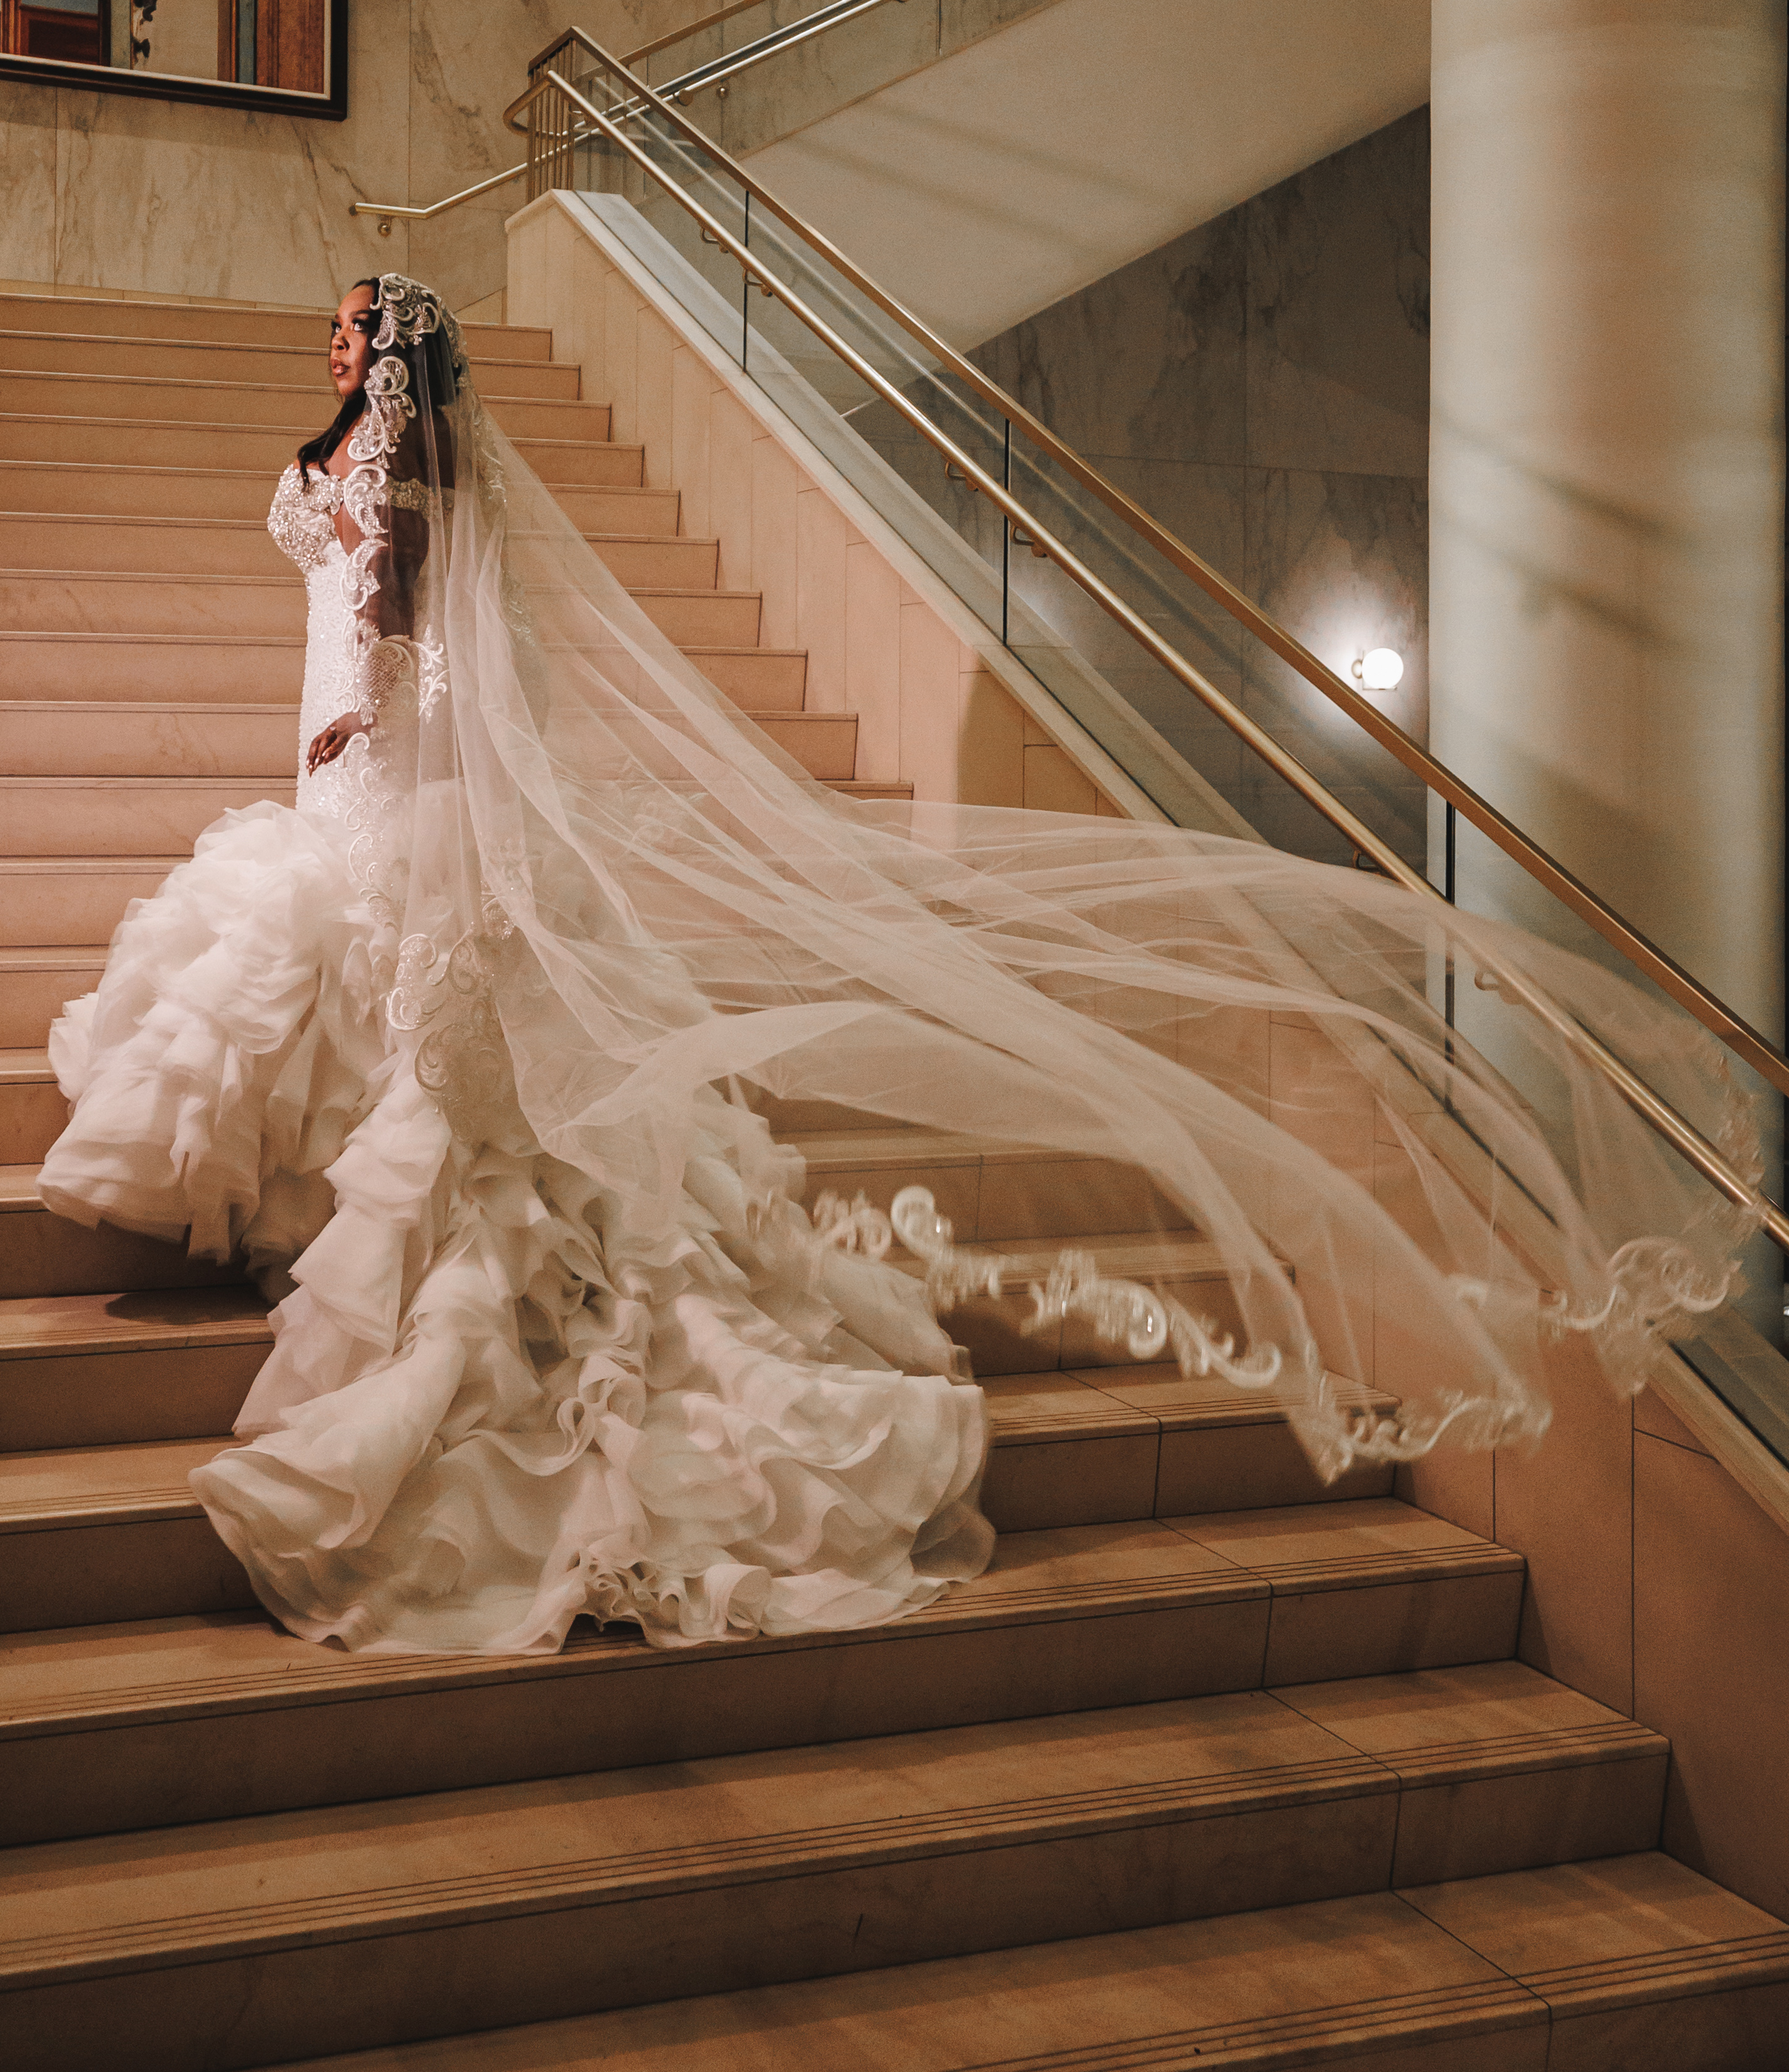 Bride, Ashley Turner, walks up a grand staircase in her wedding gown that has ruffled train and a long veil trailing behind her in the air.